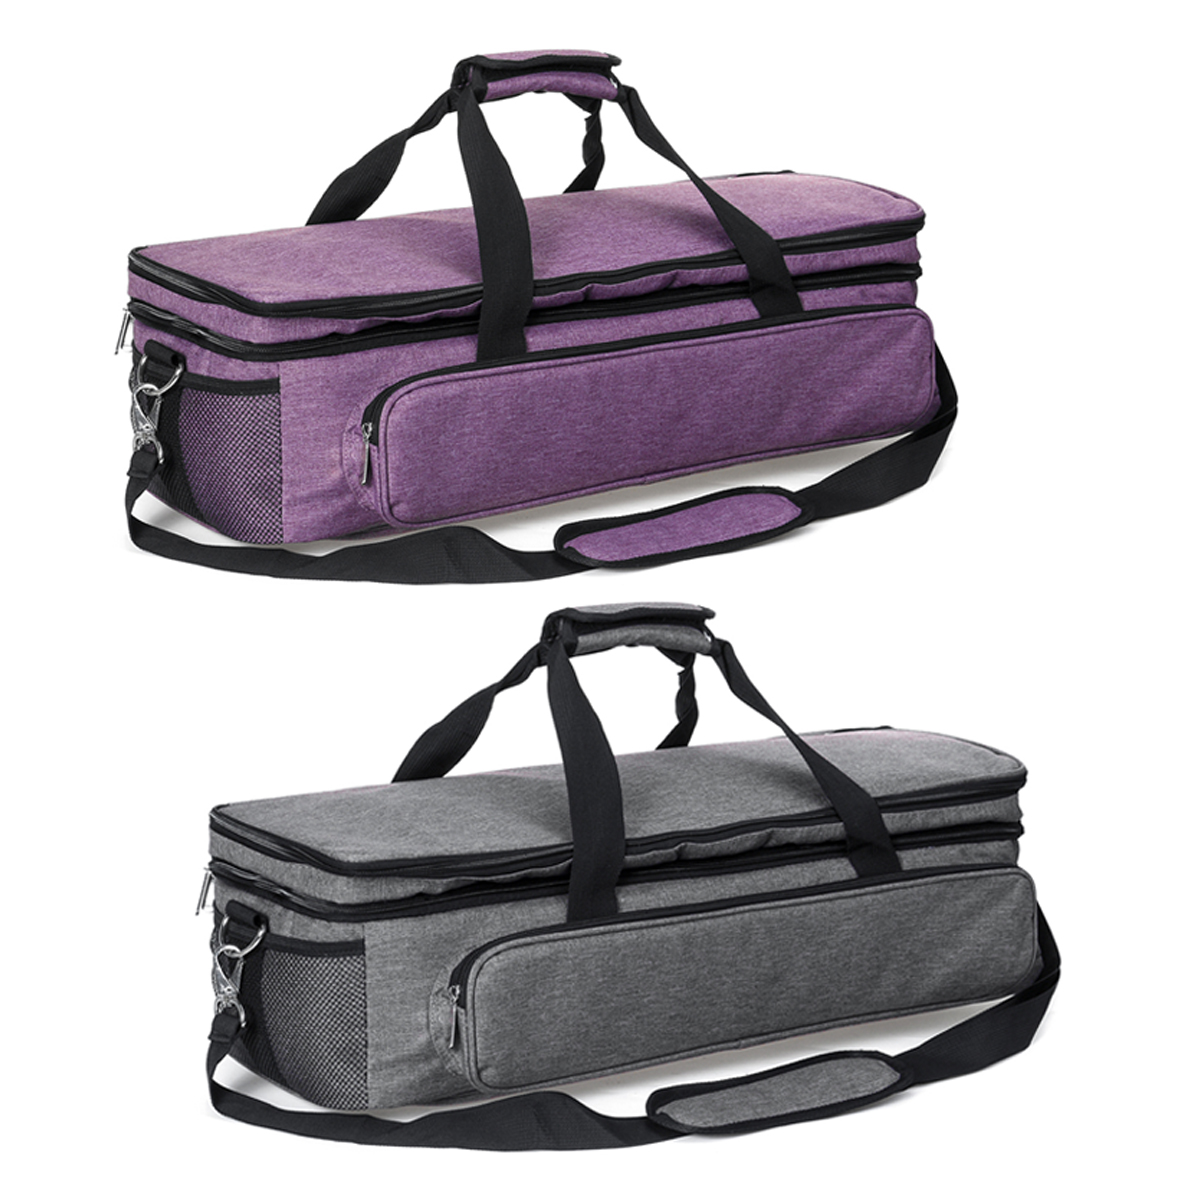 Portable-600D-Oxford-Cloth-Cutting-Machine-Carrying-Storage-Bag-Tool-Travel-Case-1618038-3